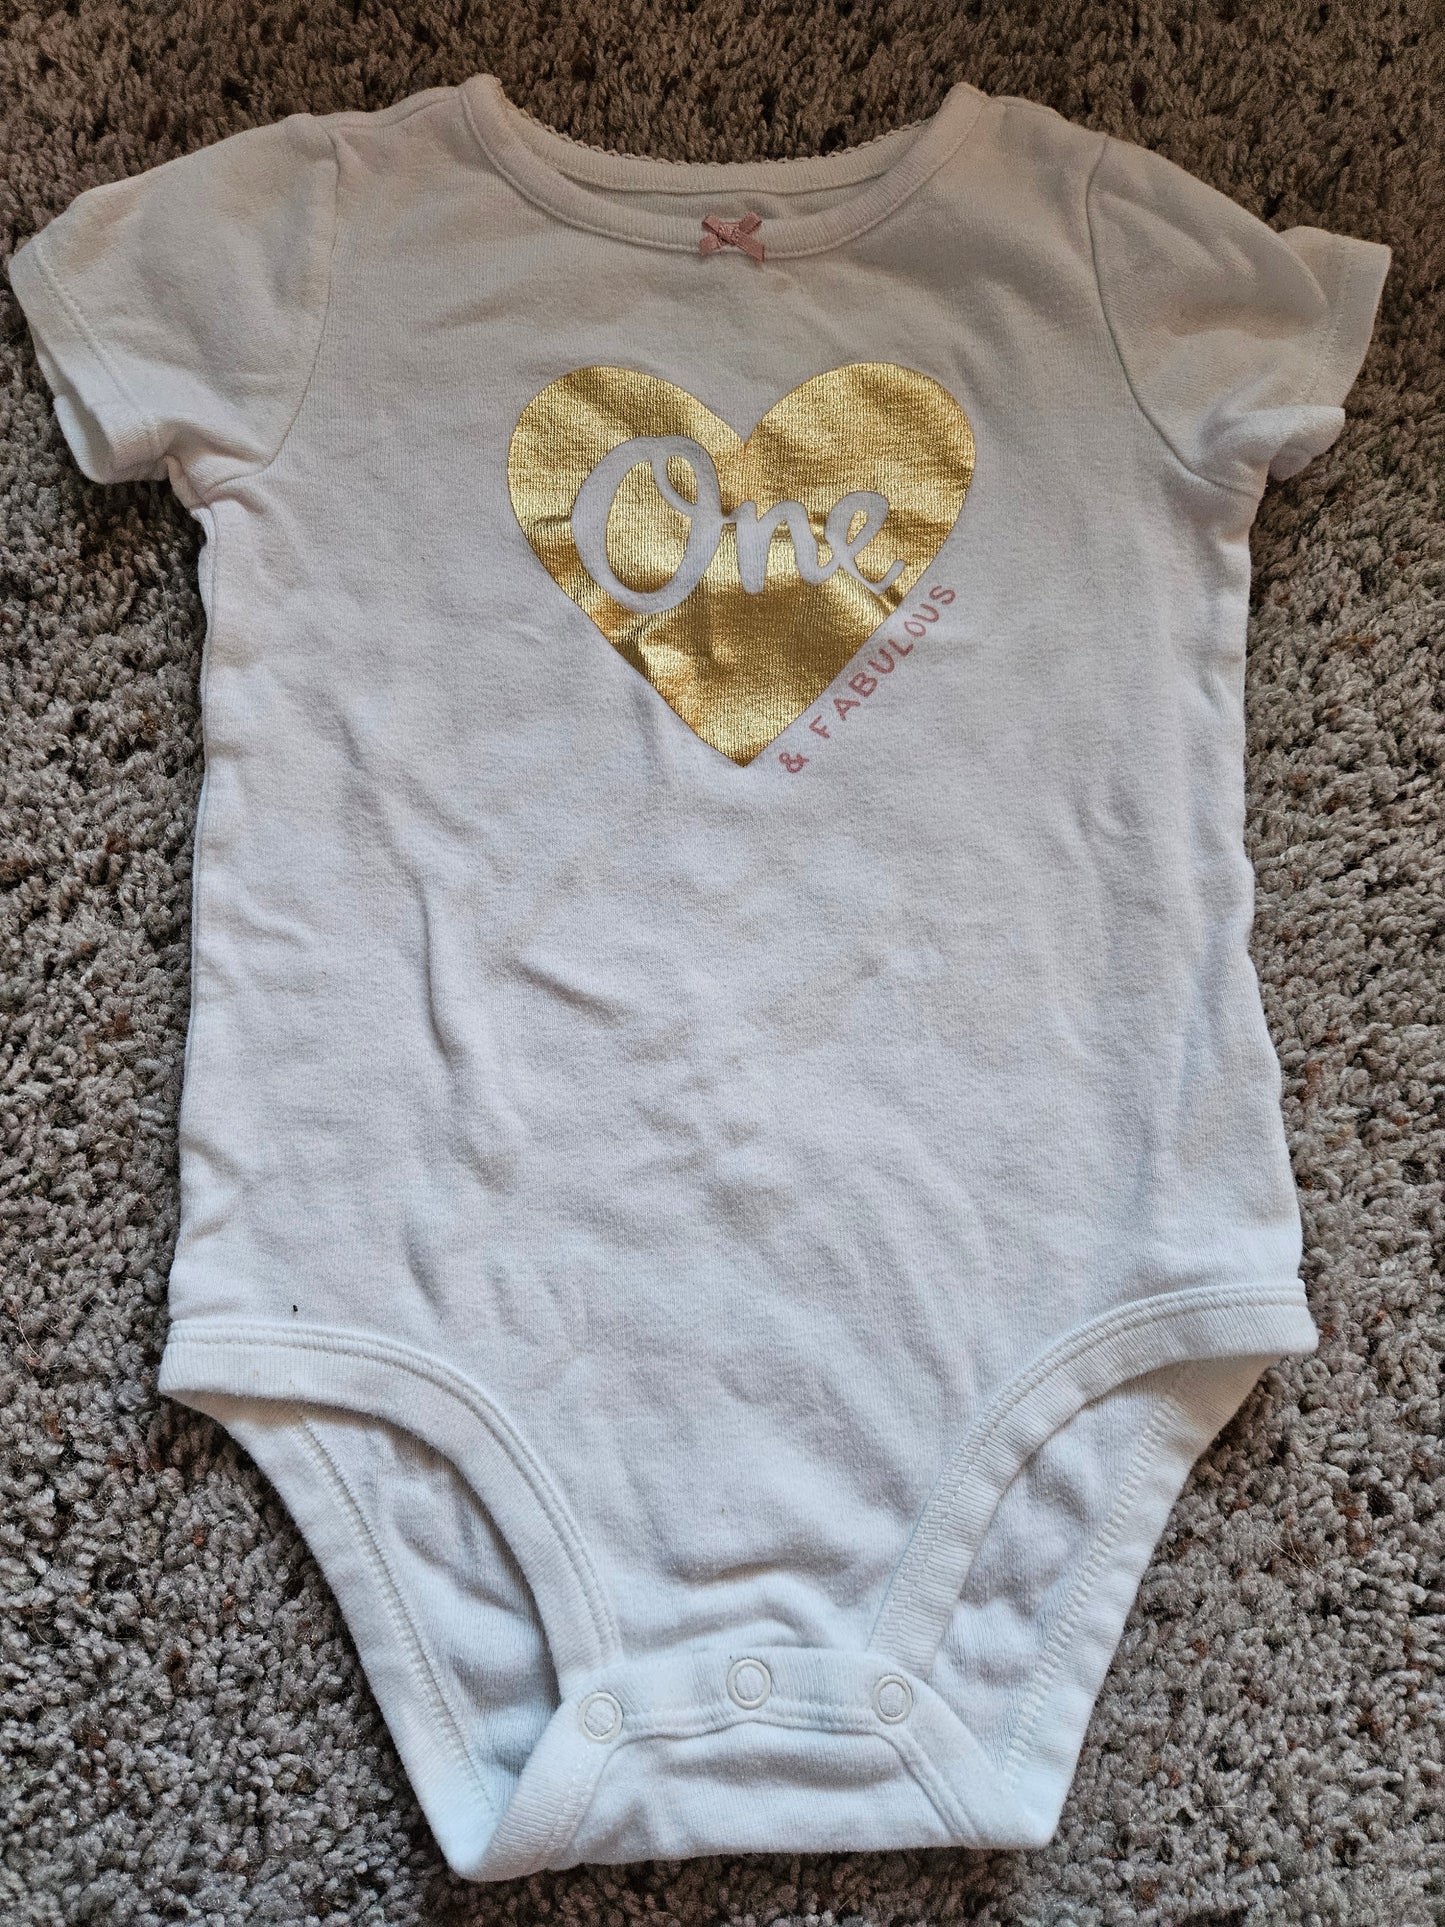 24 month "one and fabulous" short-sleeve onesie